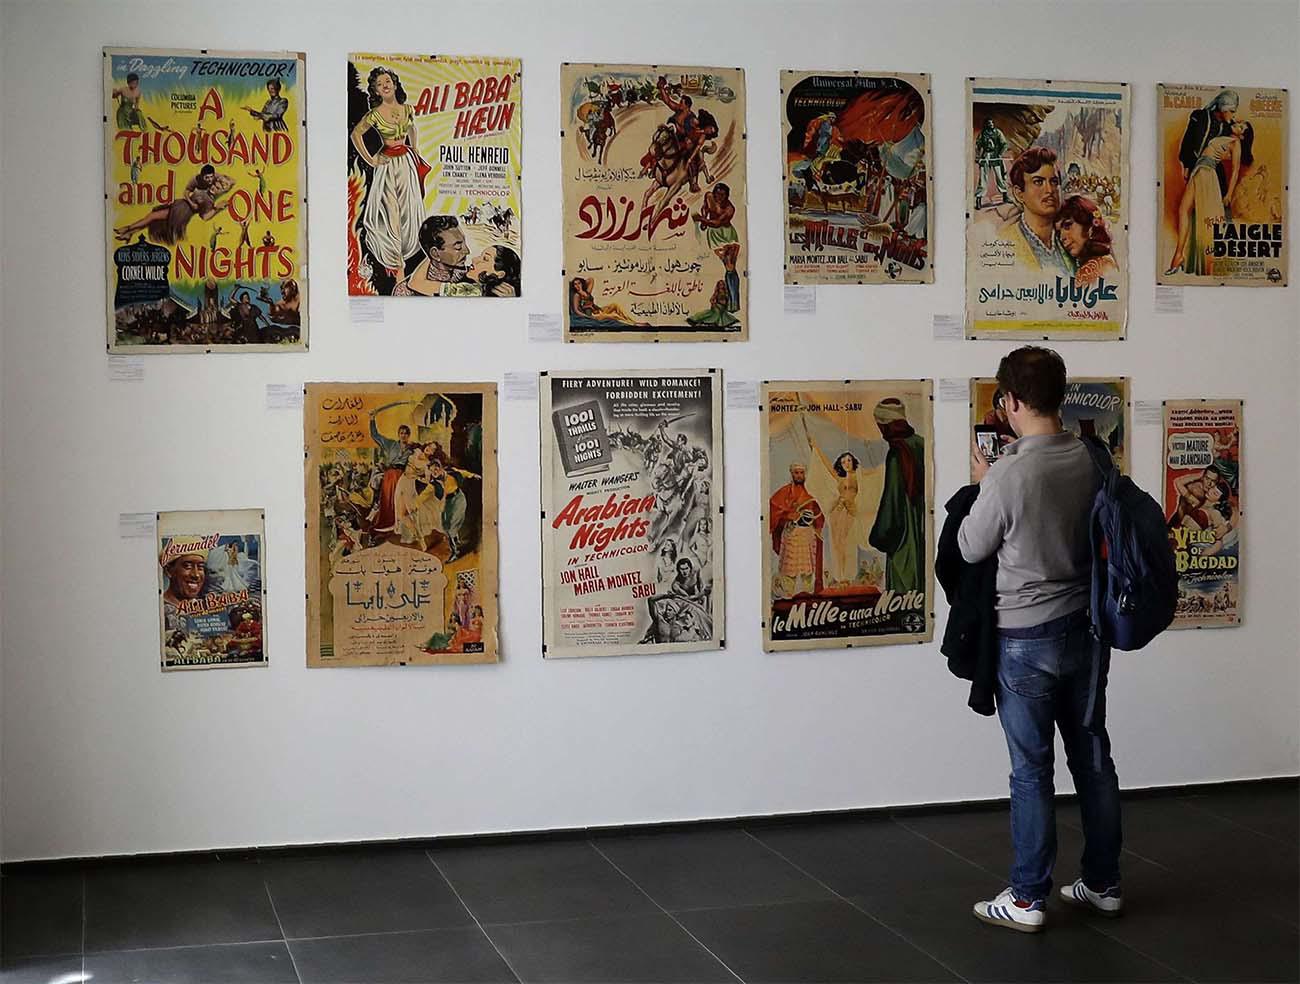 Some of the posters date back to 1930s Egypt or Lebanon in the late 1950s